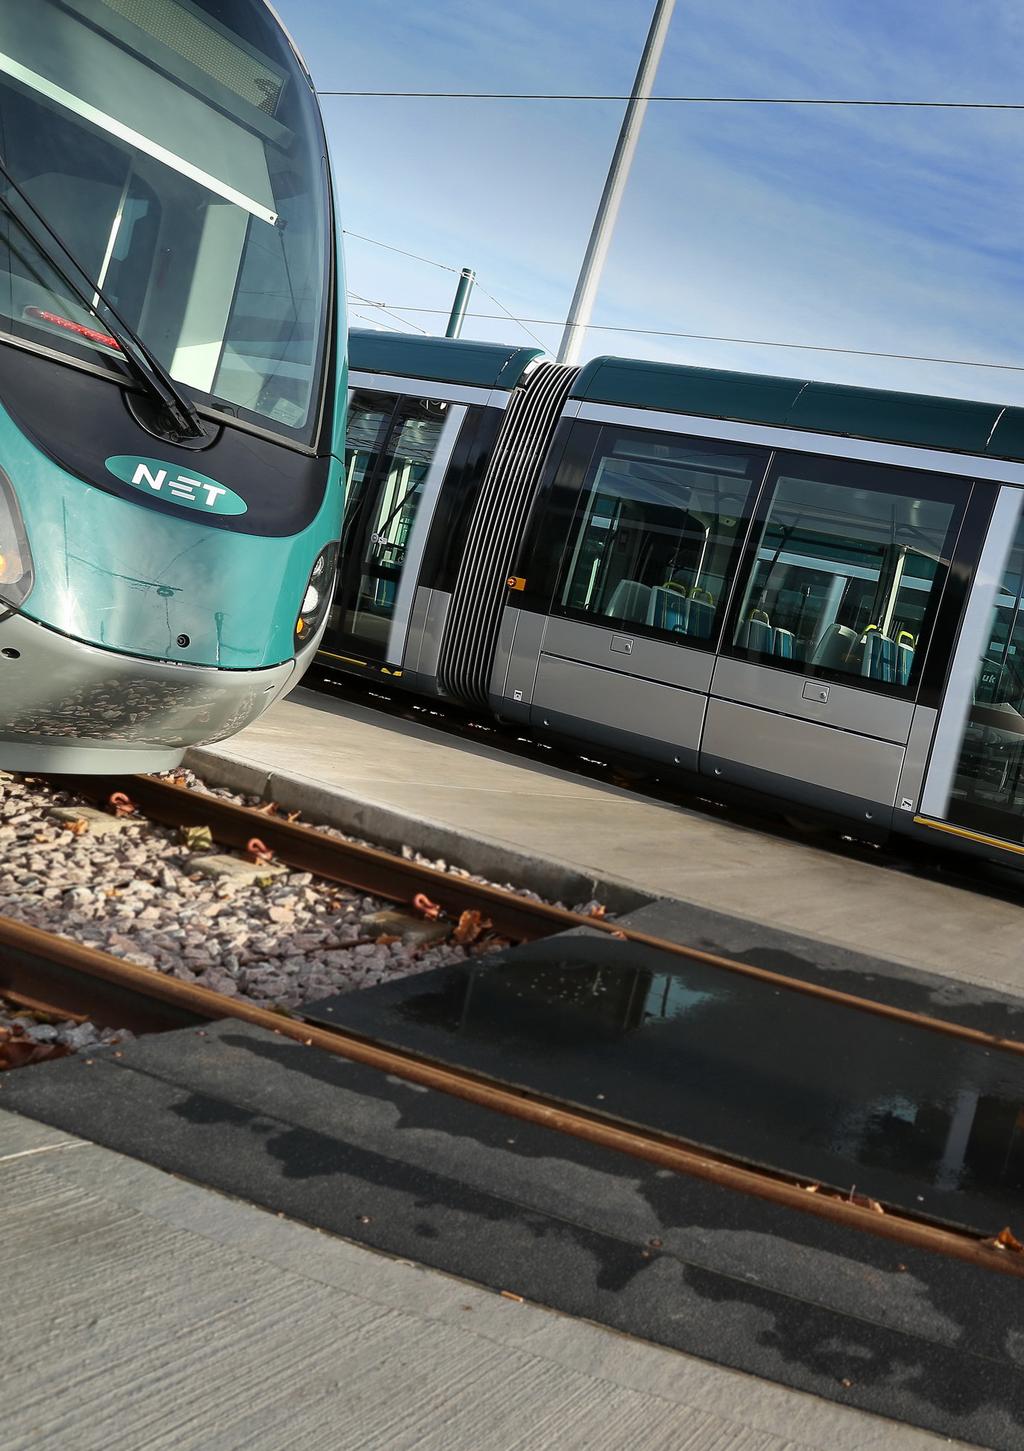 Your new tram network is really bringing Nottingham Together by providing quick and reliable cross-city services running from every 7 minutes throughout the day.